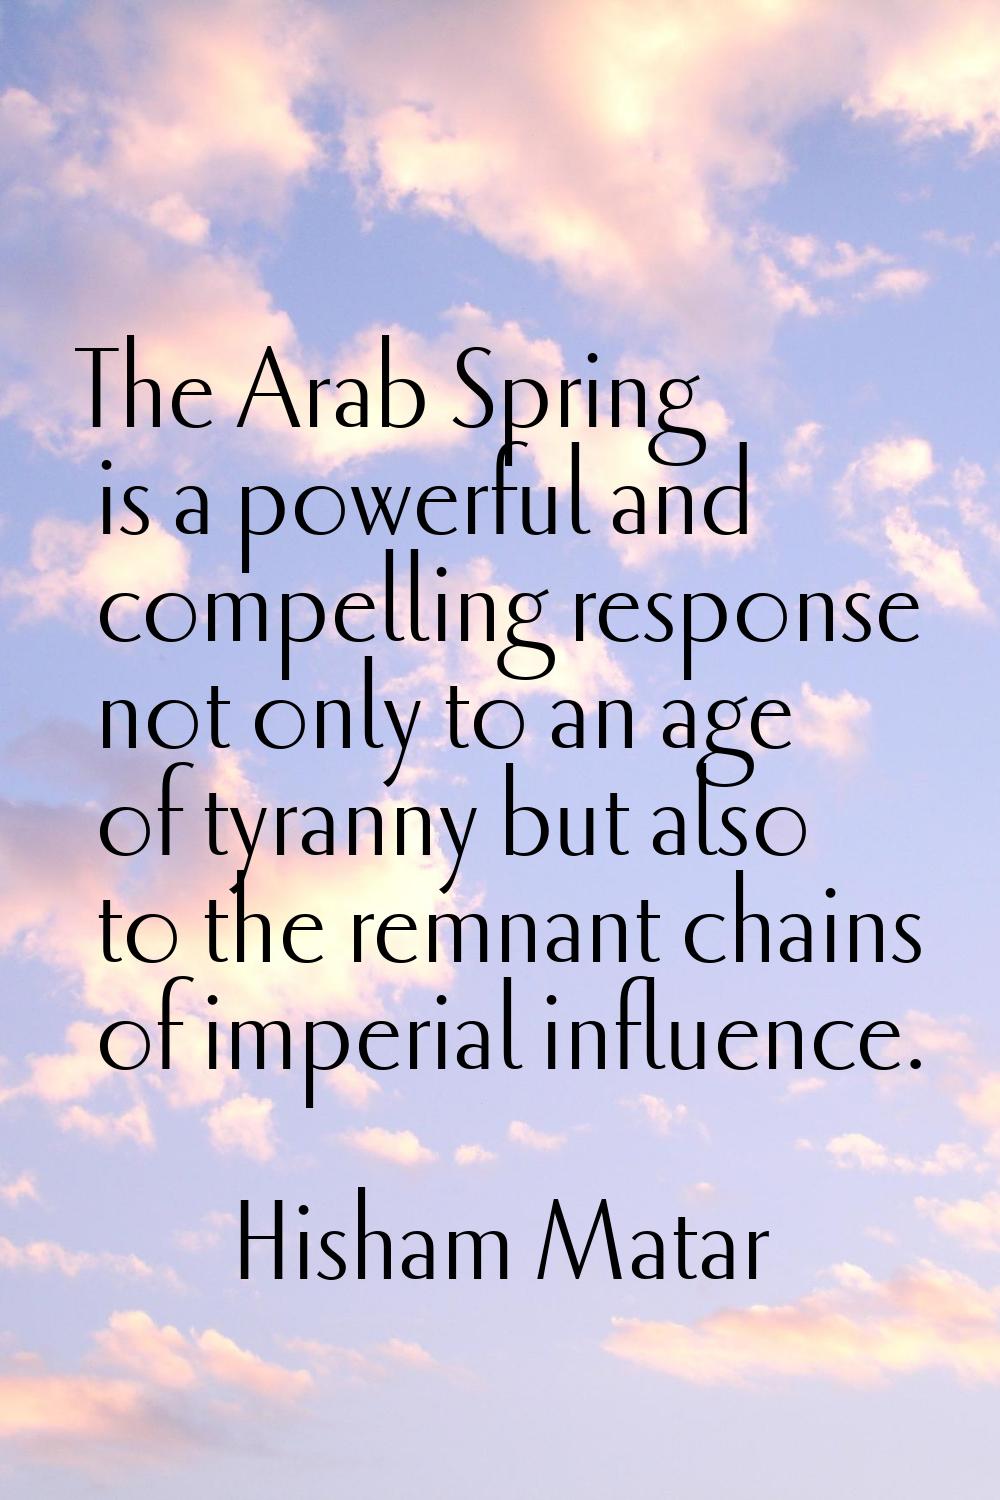 The Arab Spring is a powerful and compelling response not only to an age of tyranny but also to the